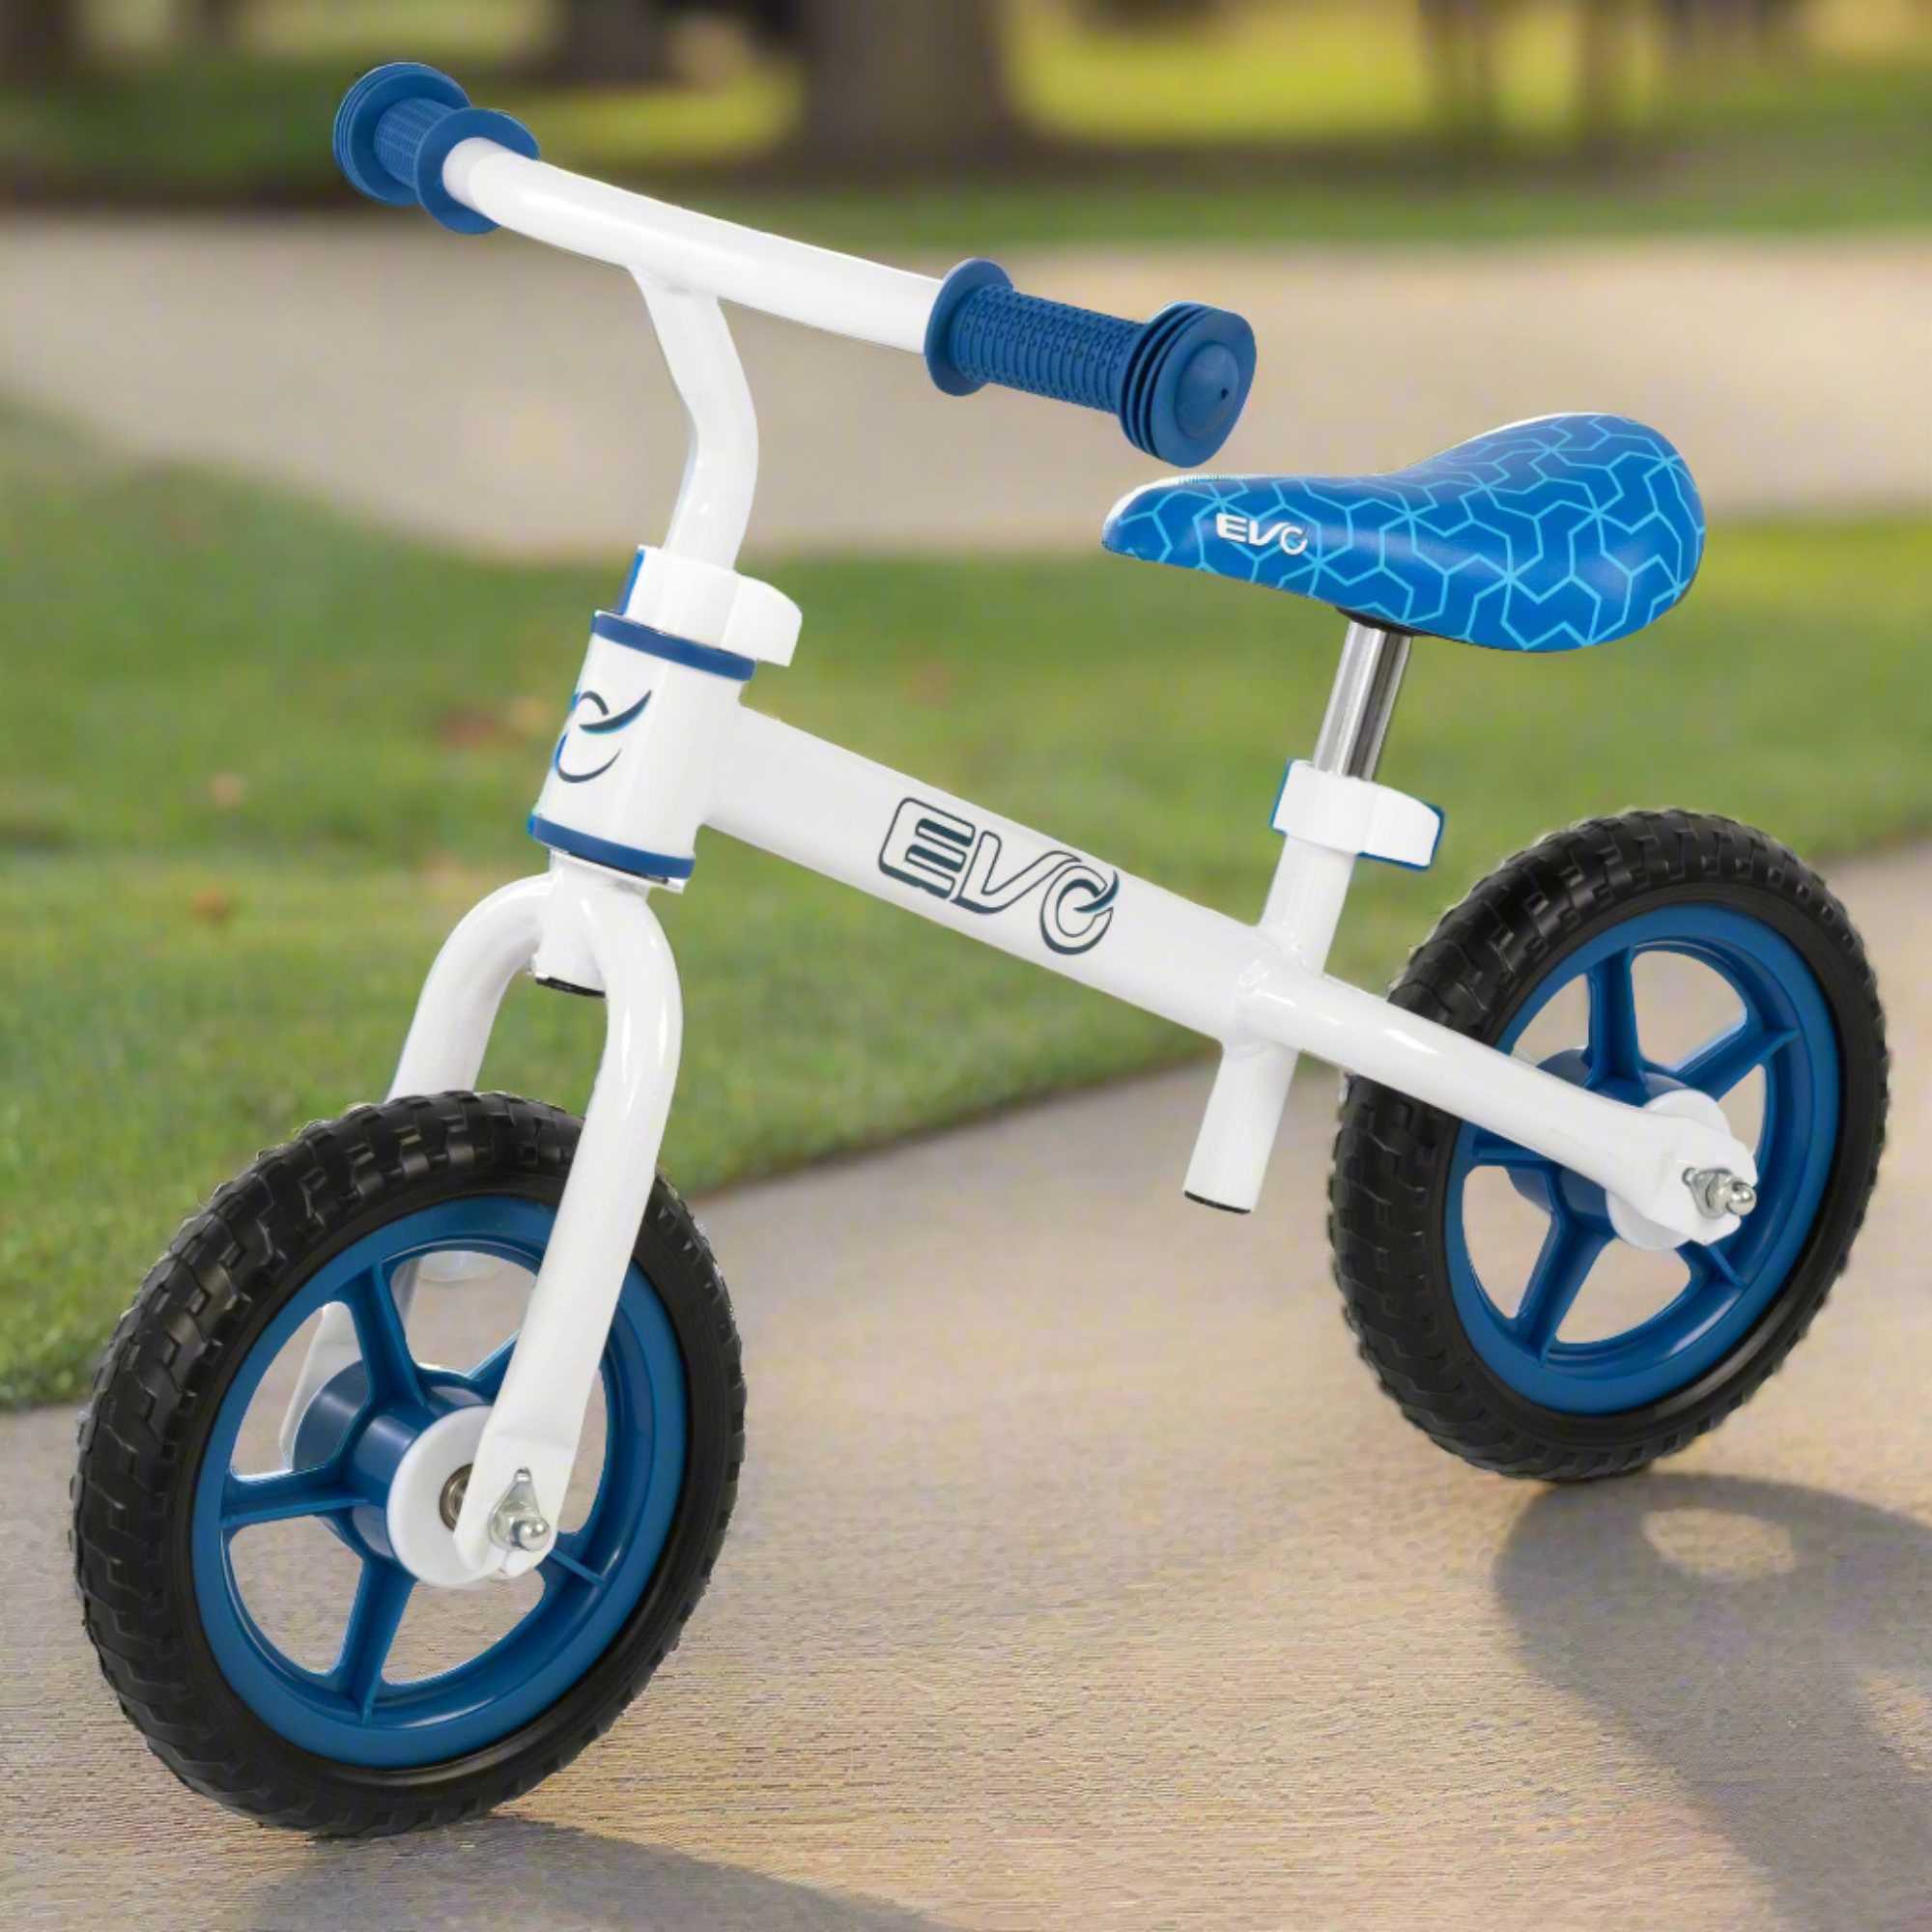 Child riding the EVO Balance Bike outdoors, showcasing the lightweight and durable design perfect for young learners to develop their balance and coordination skills